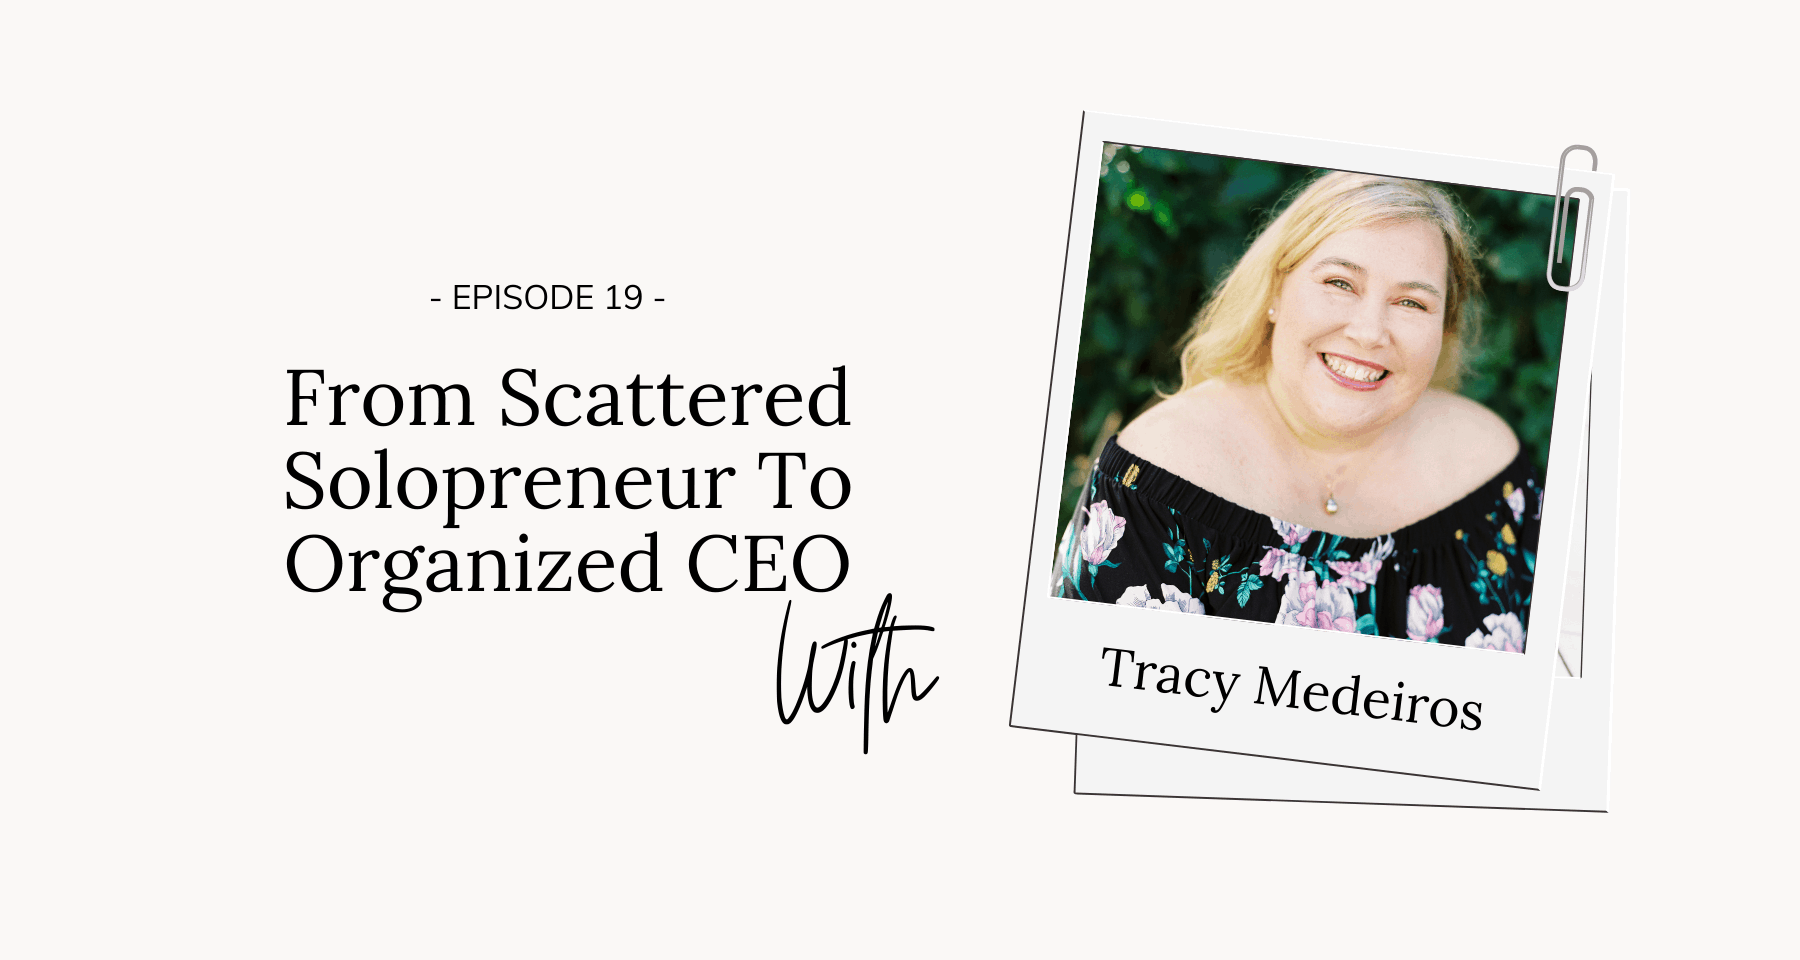 From Scattered Solopreneur To Organized CEO